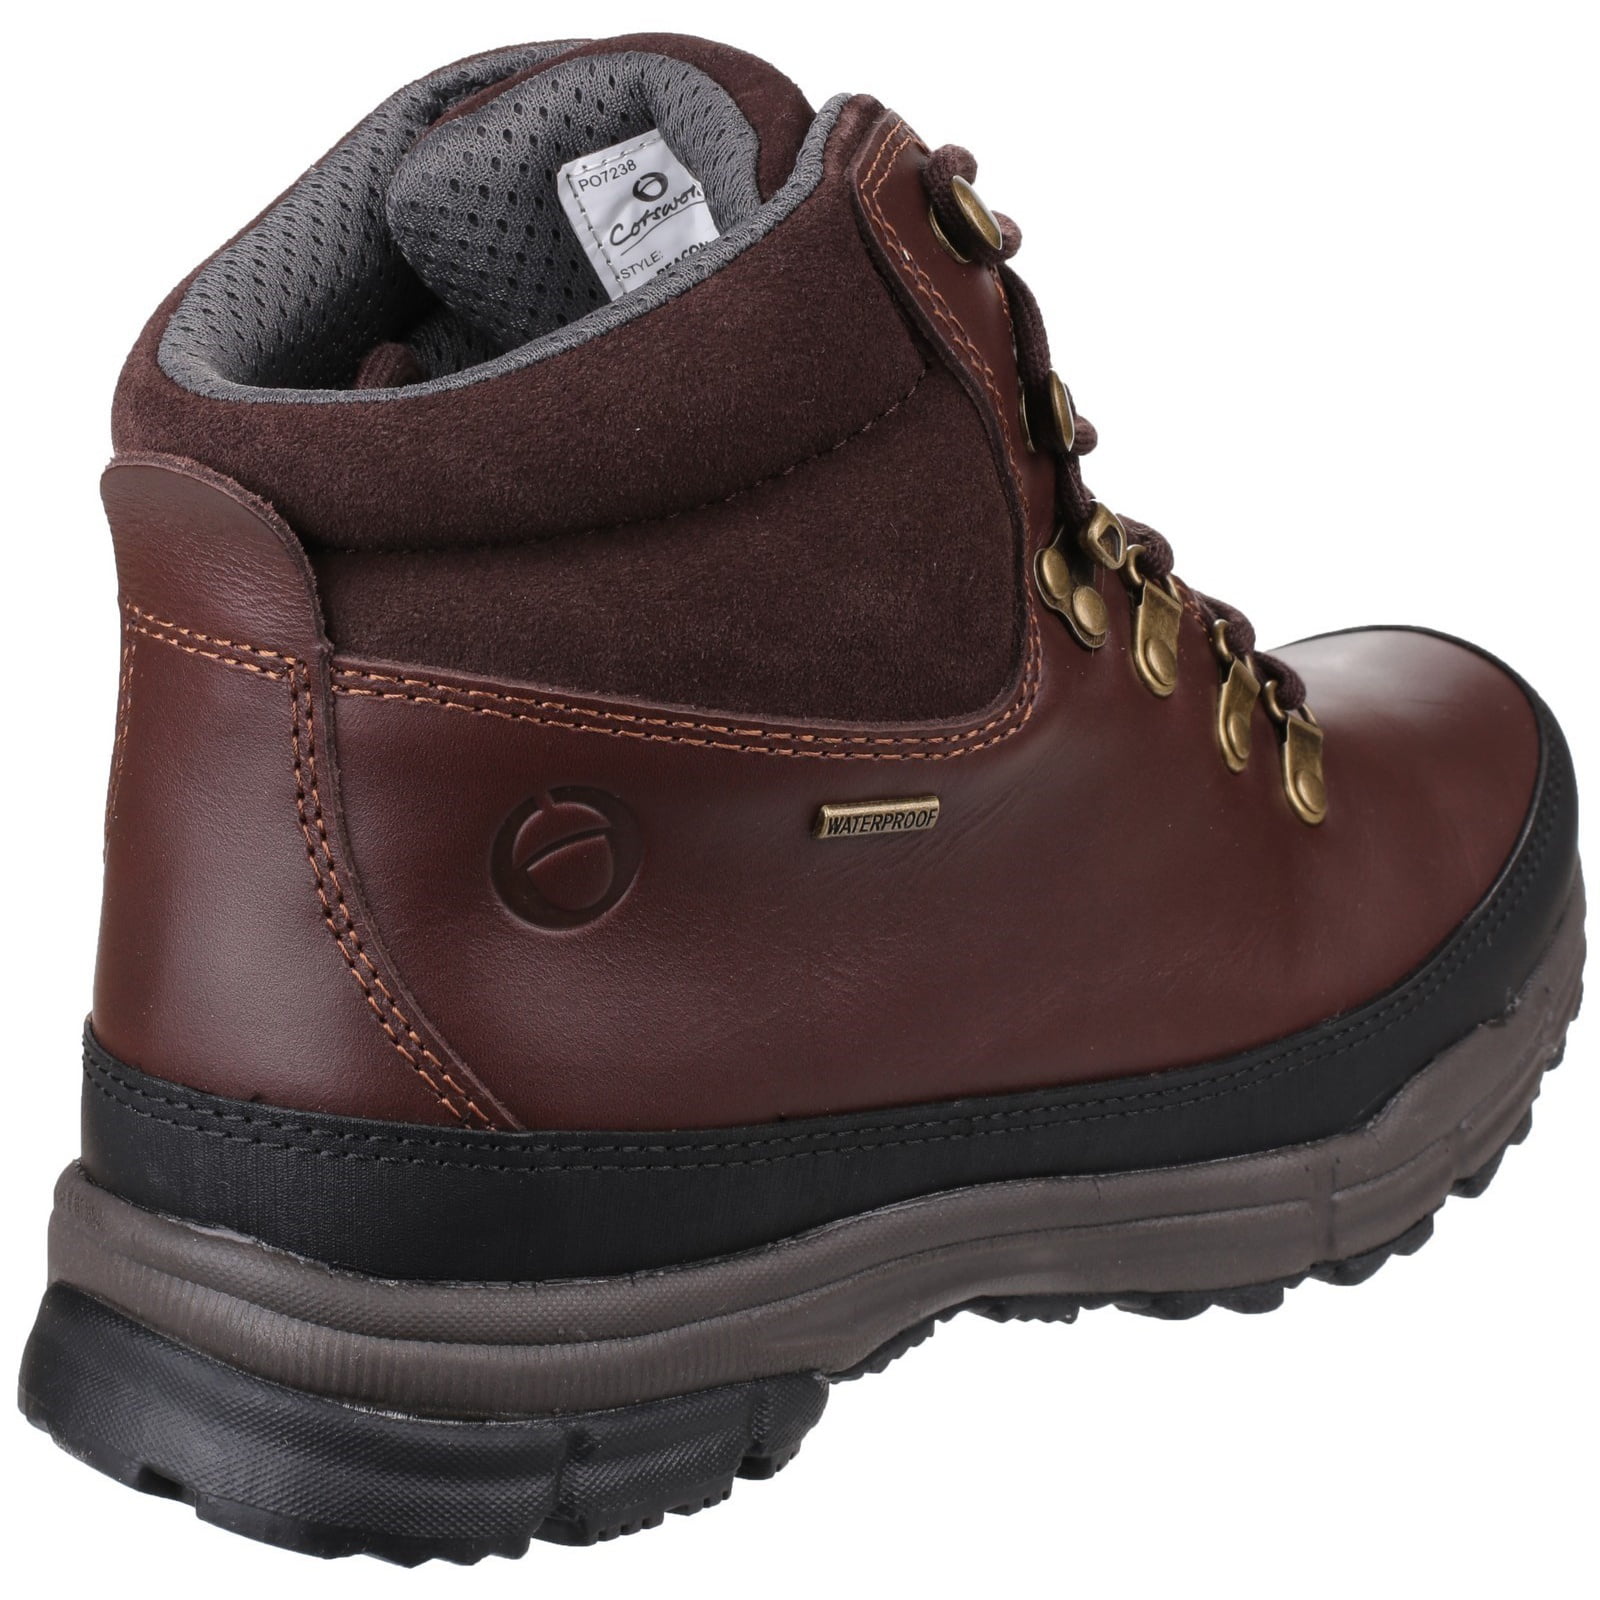 Cotswold Womens/Ladies Beacon Lace Up Hiking Boots